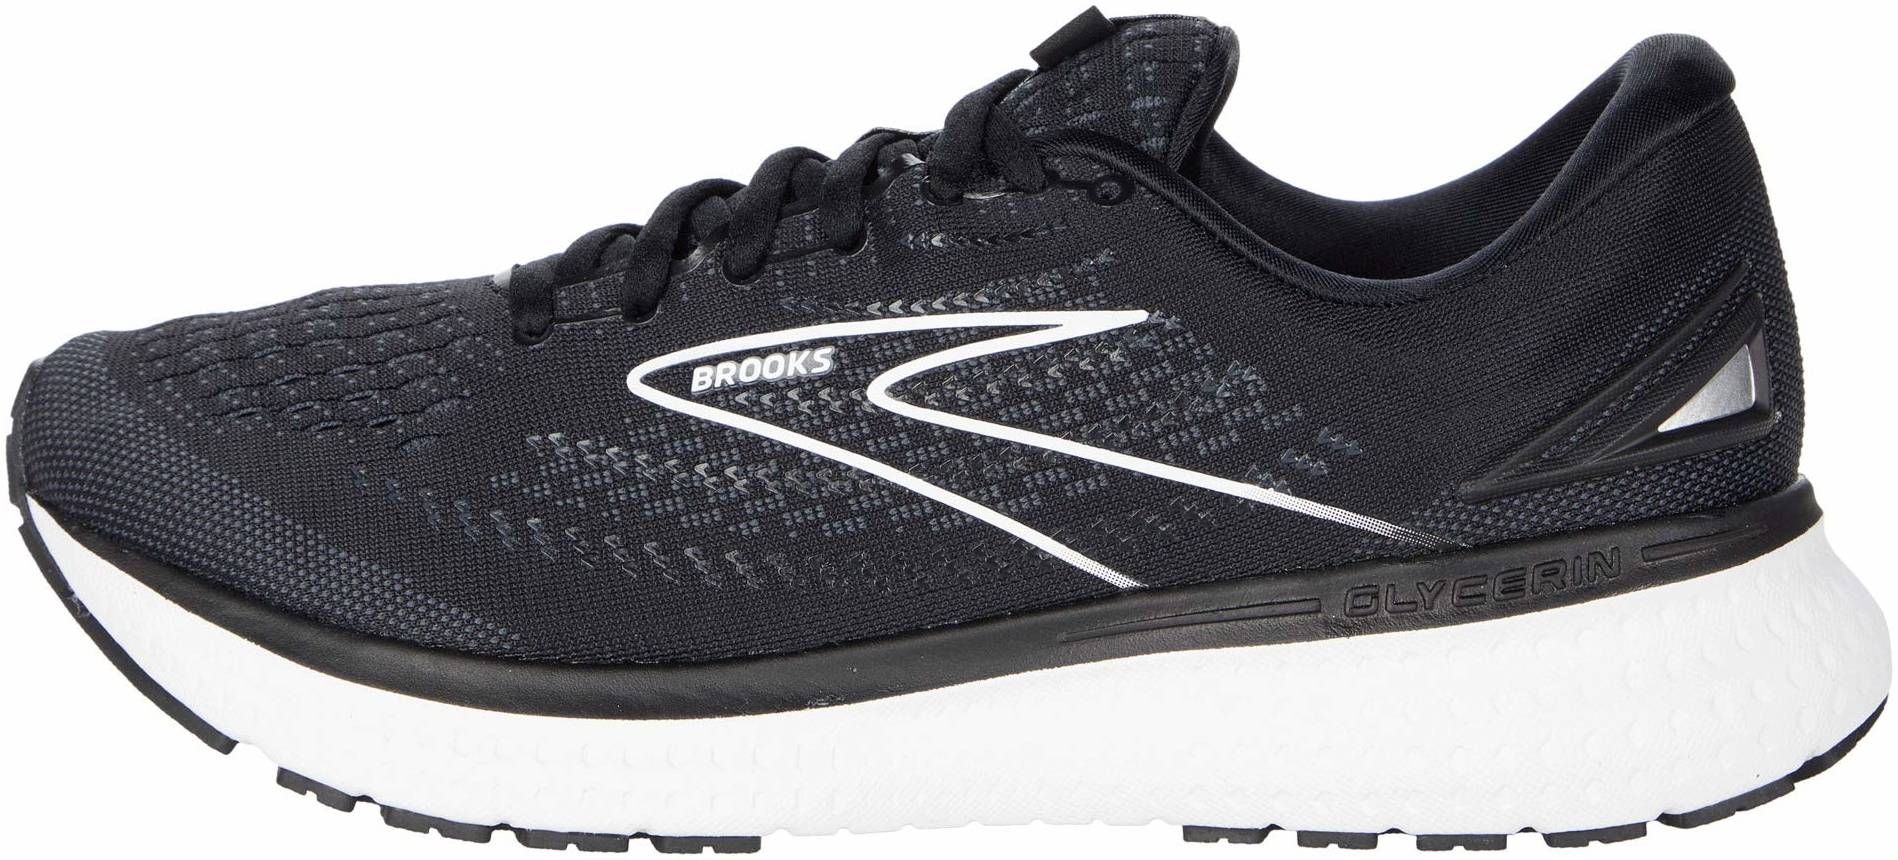 Save 18% on Wide Brooks Running Shoes 